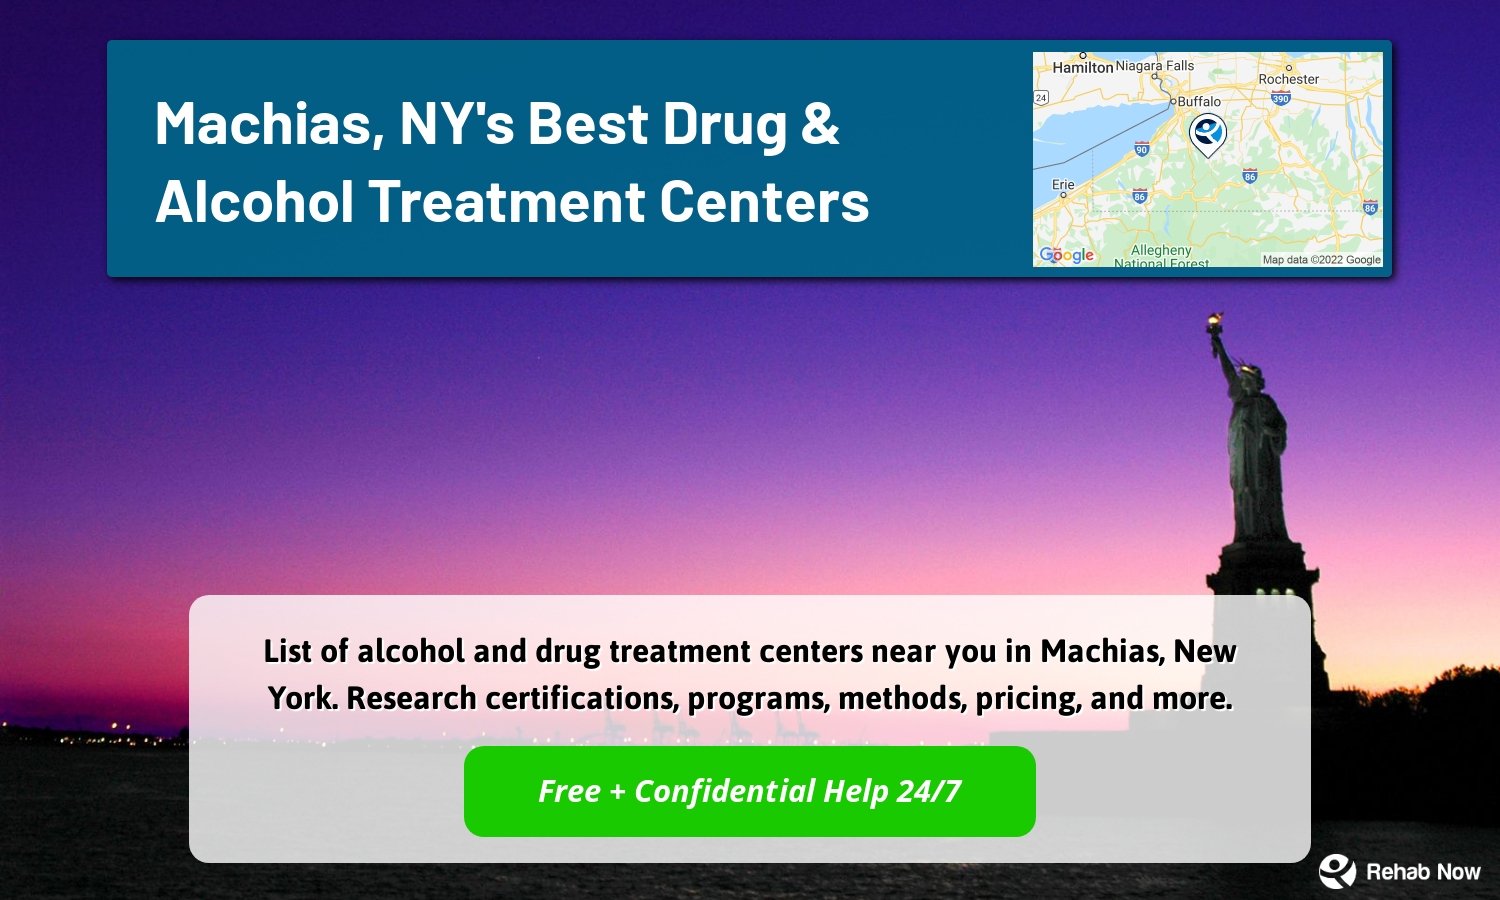 List of alcohol and drug treatment centers near you in Machias, New York. Research certifications, programs, methods, pricing, and more.